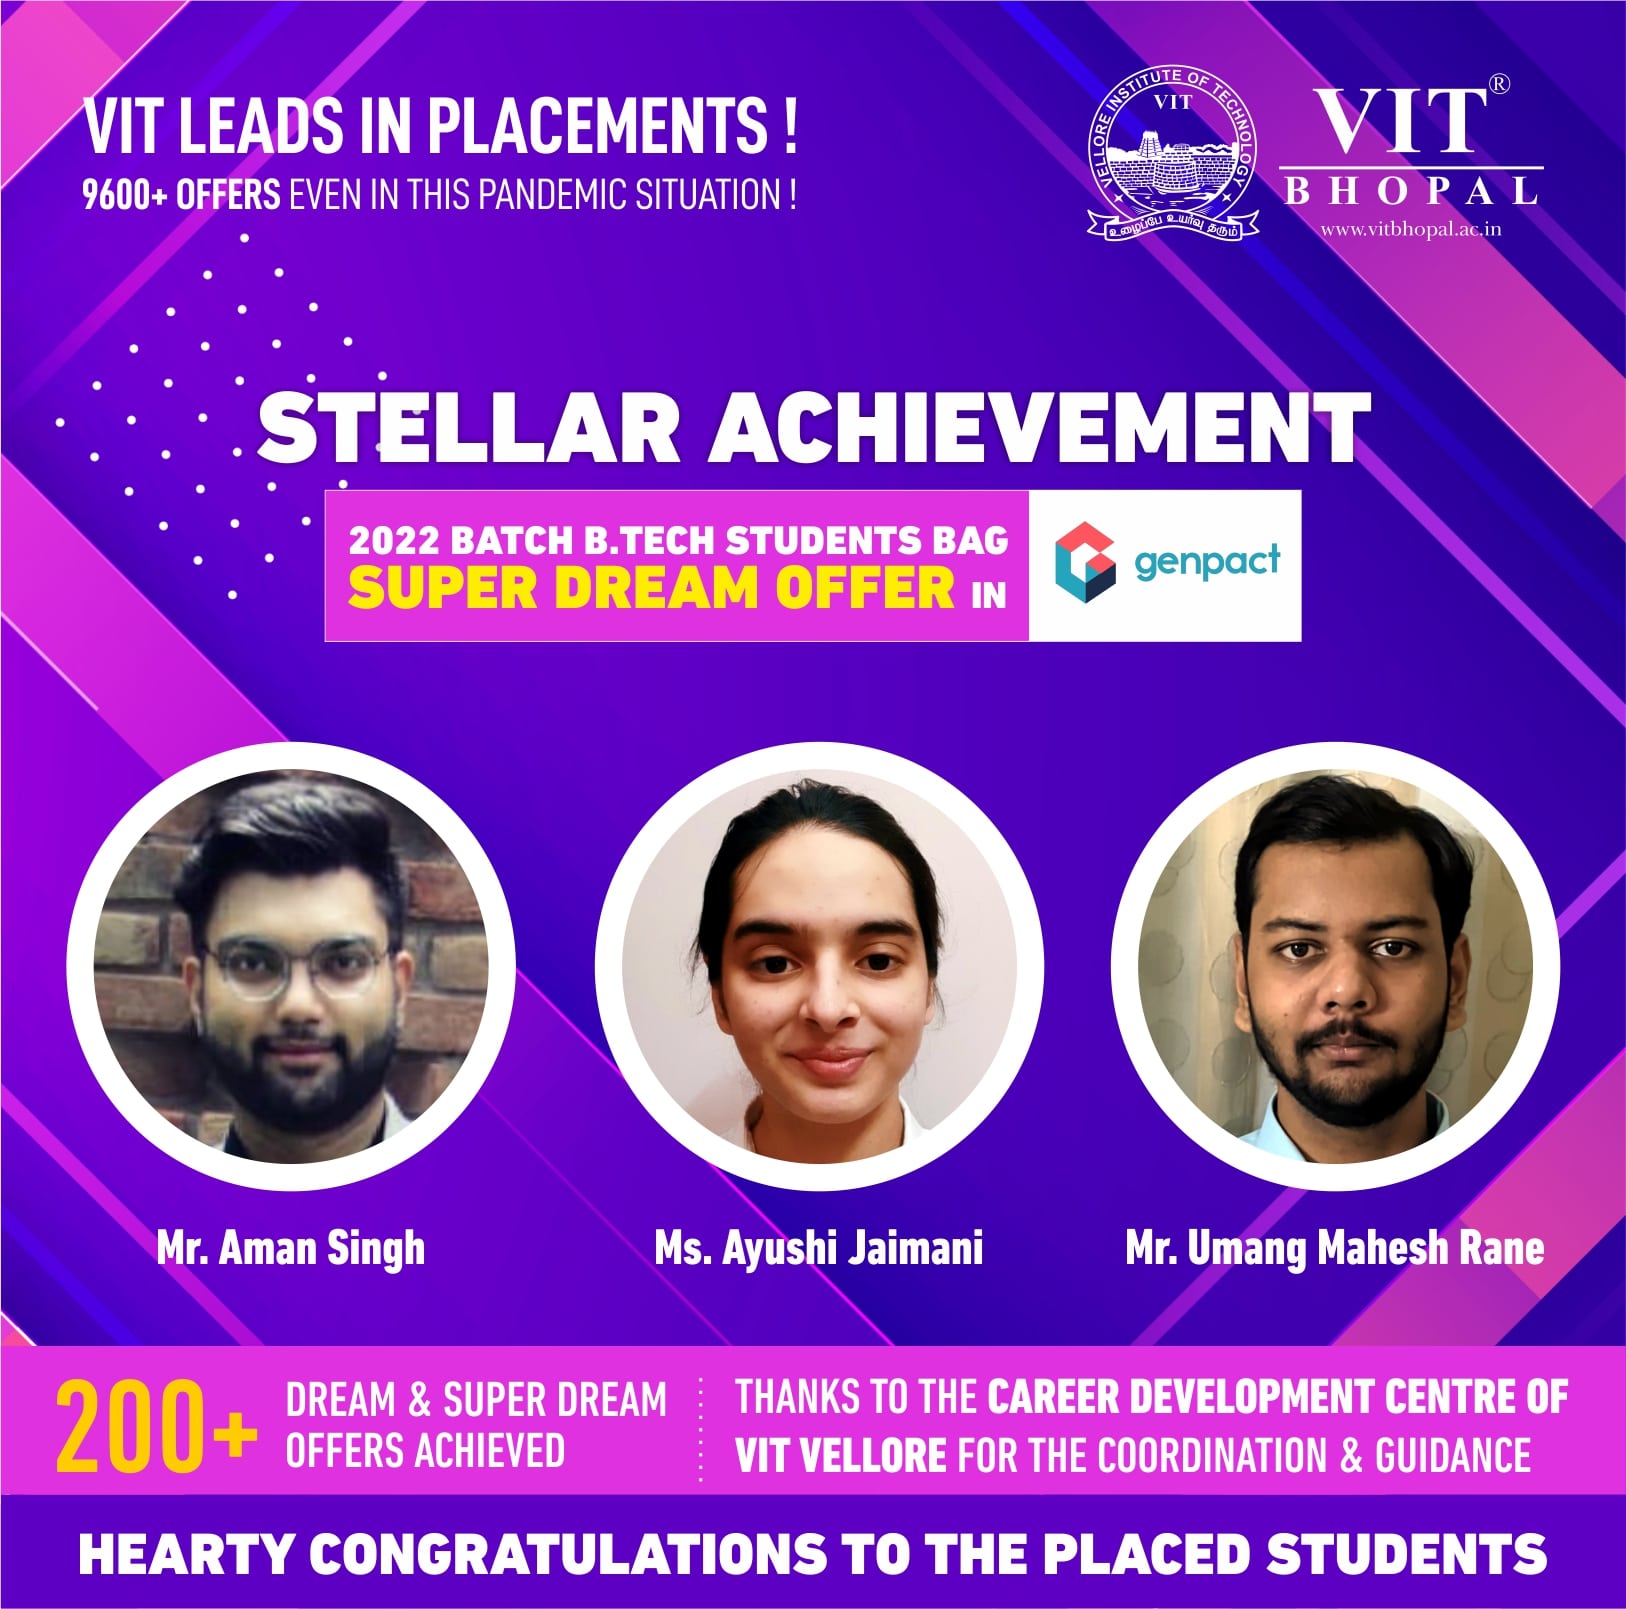 VIT Bhopal  - Best University in Central India -  Placement-Genpact2-min-1